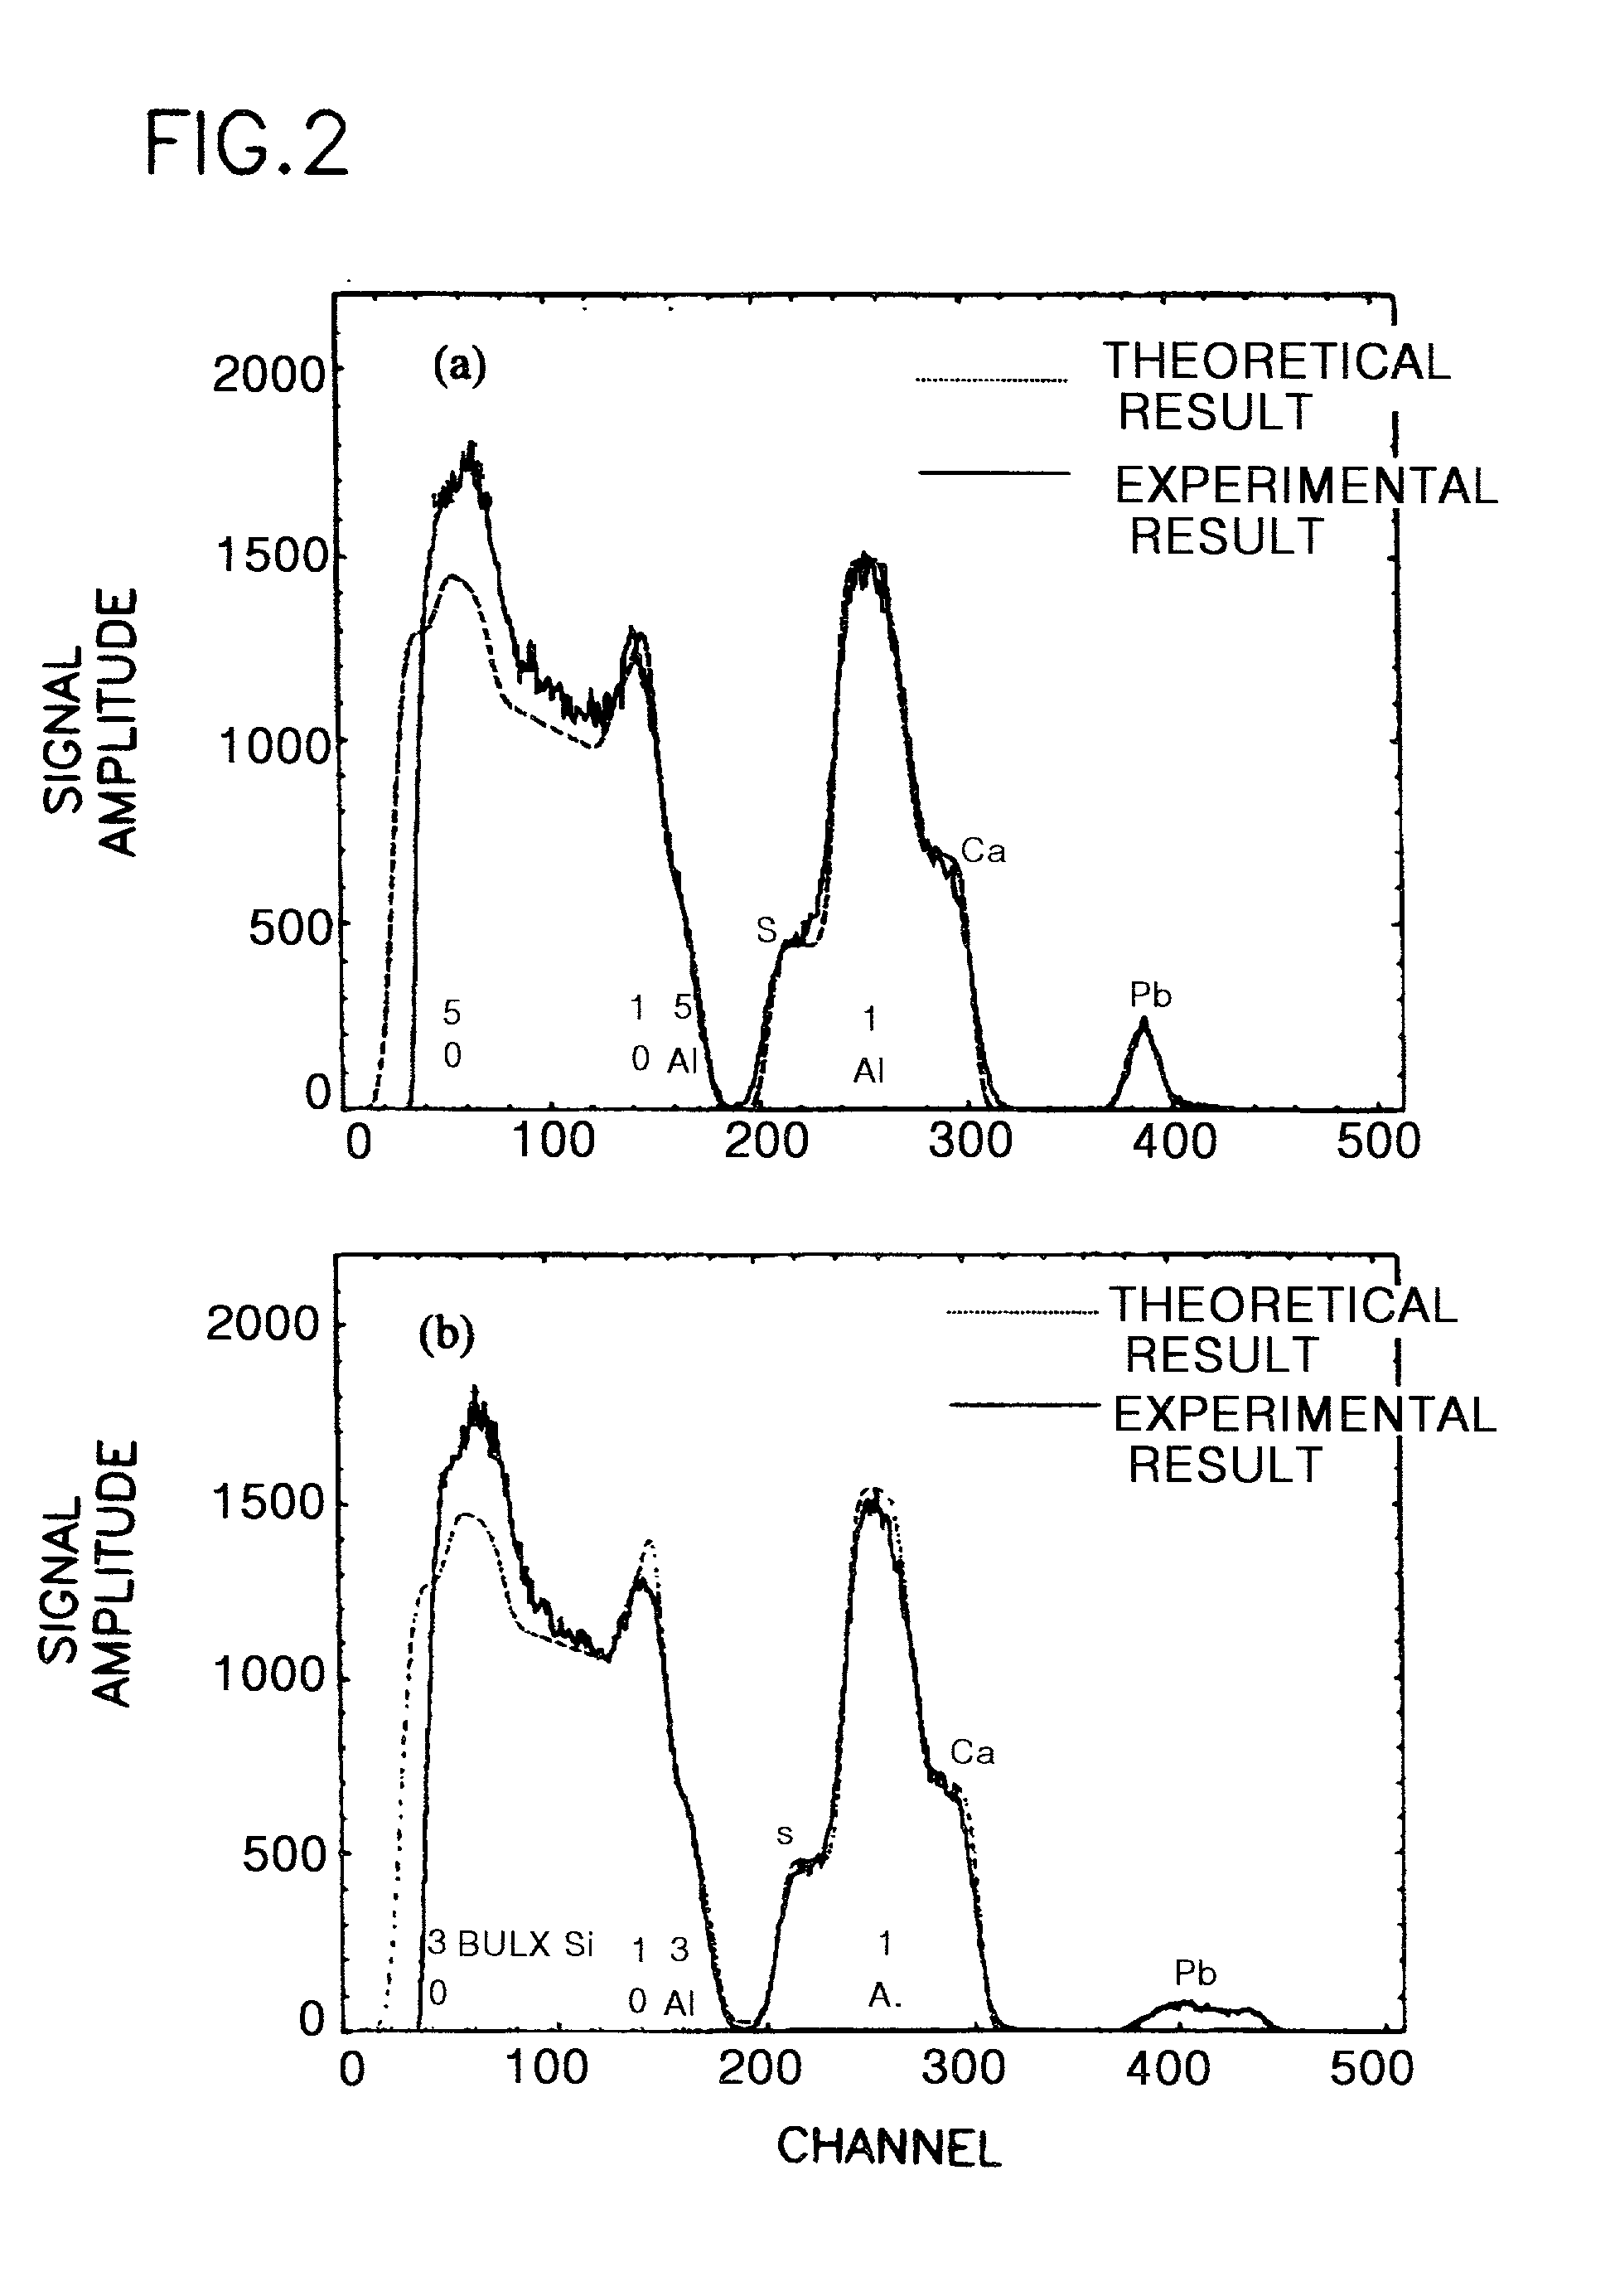 Method of fabricating electroluminescent device using coordination metal compounds adducted with electron donor ligands as precursors